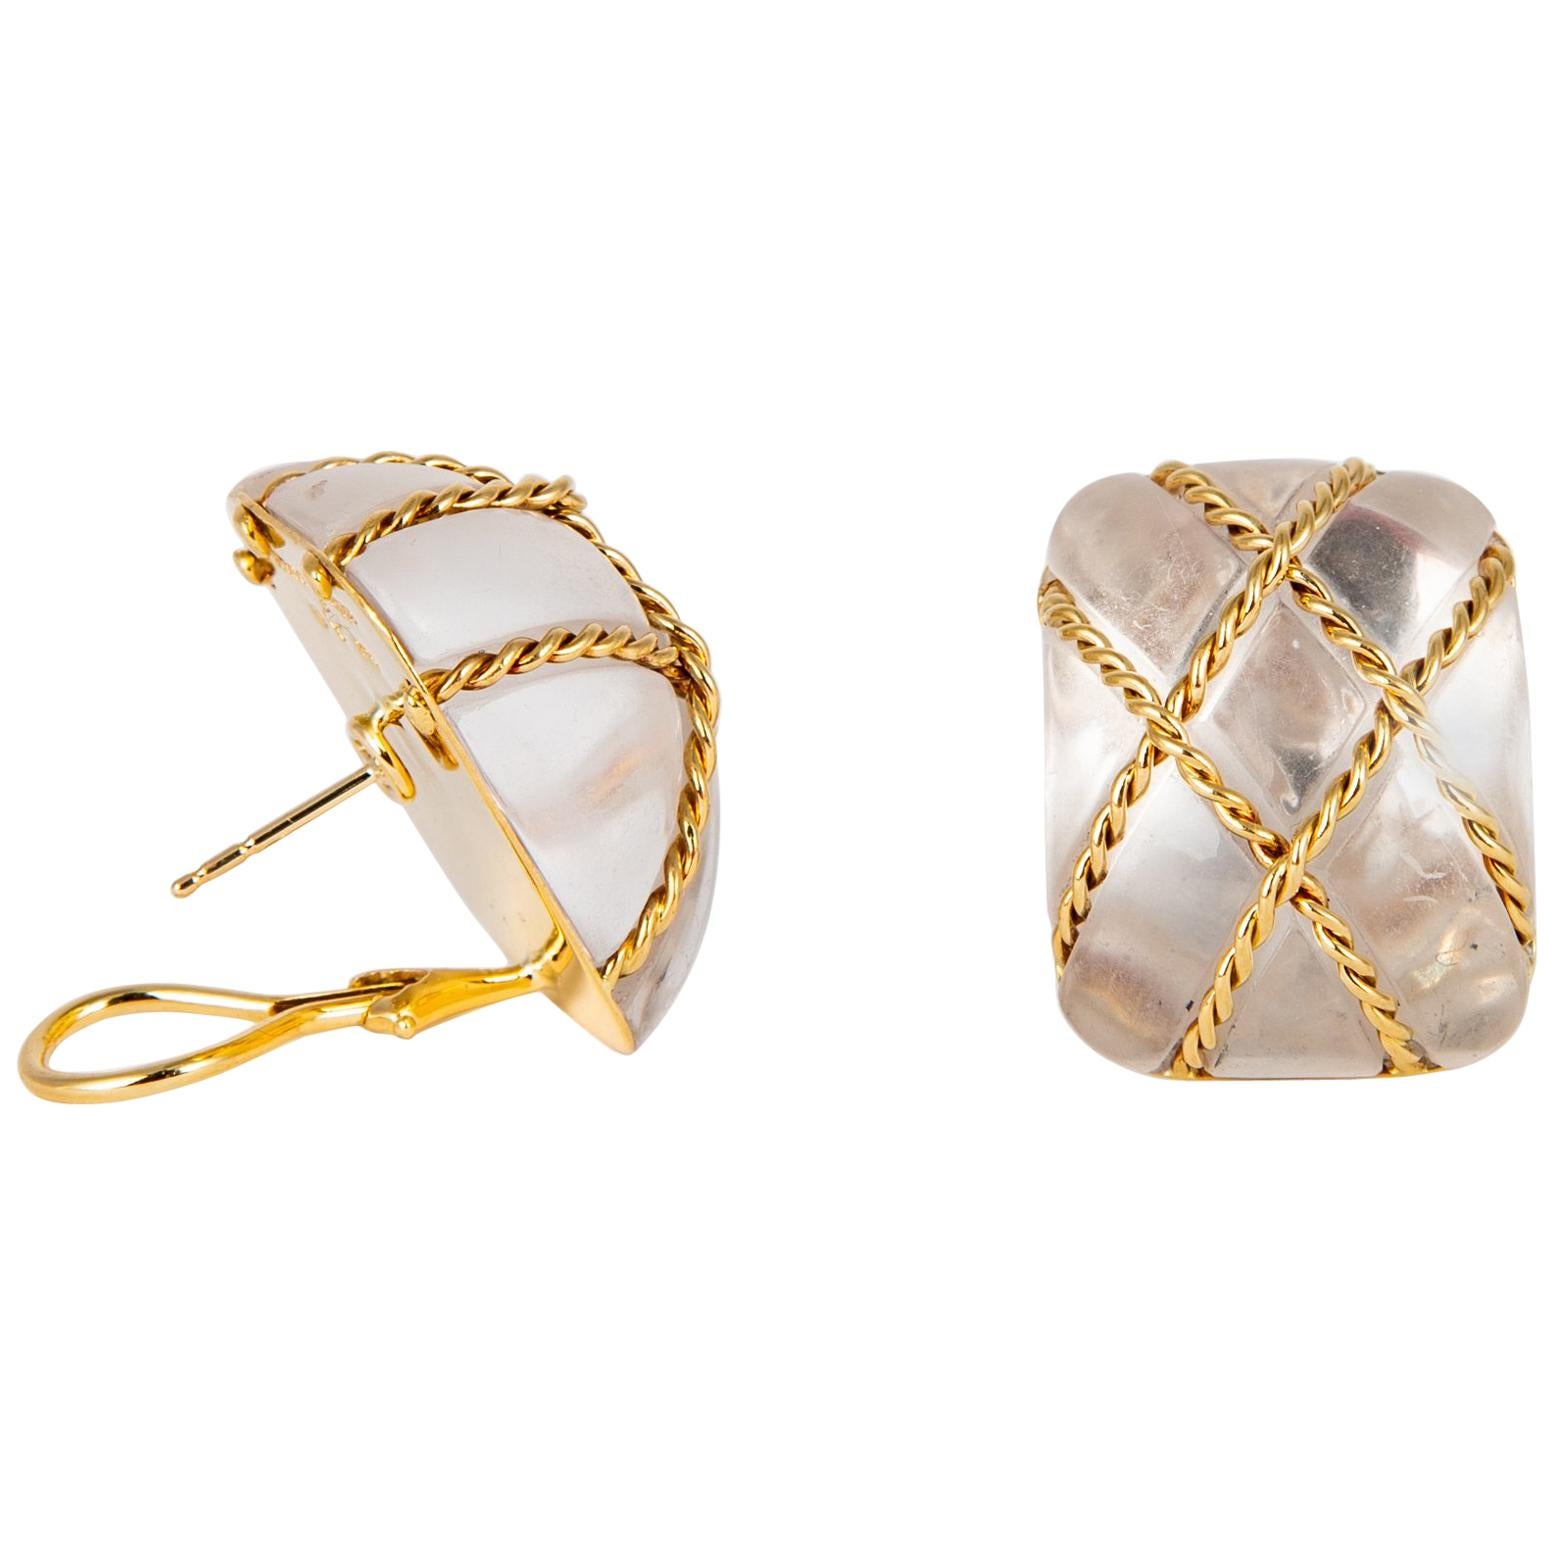 Seaman Schepps Crystal and Gold Cage Earrings